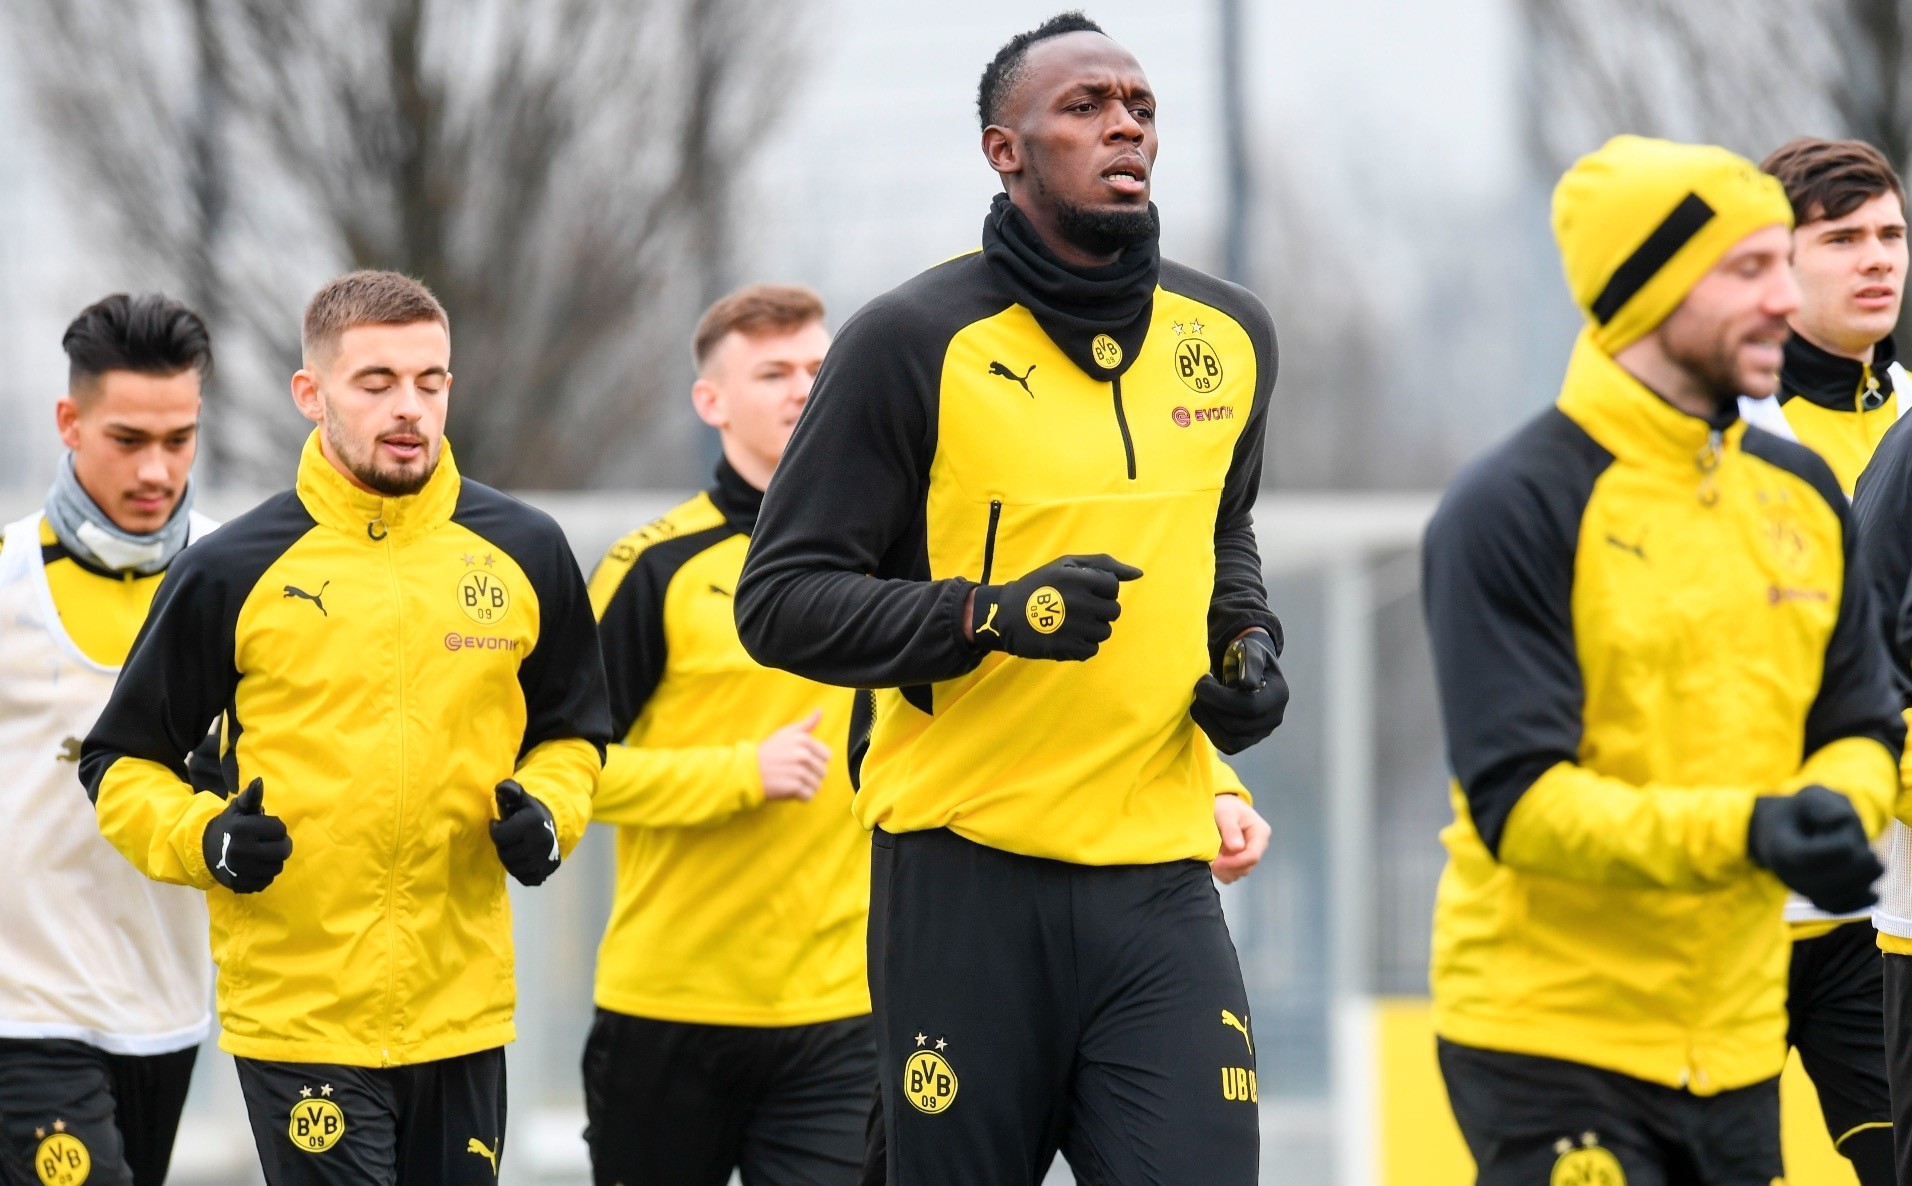 Bolt took part in team exercises with the Dortmund players.